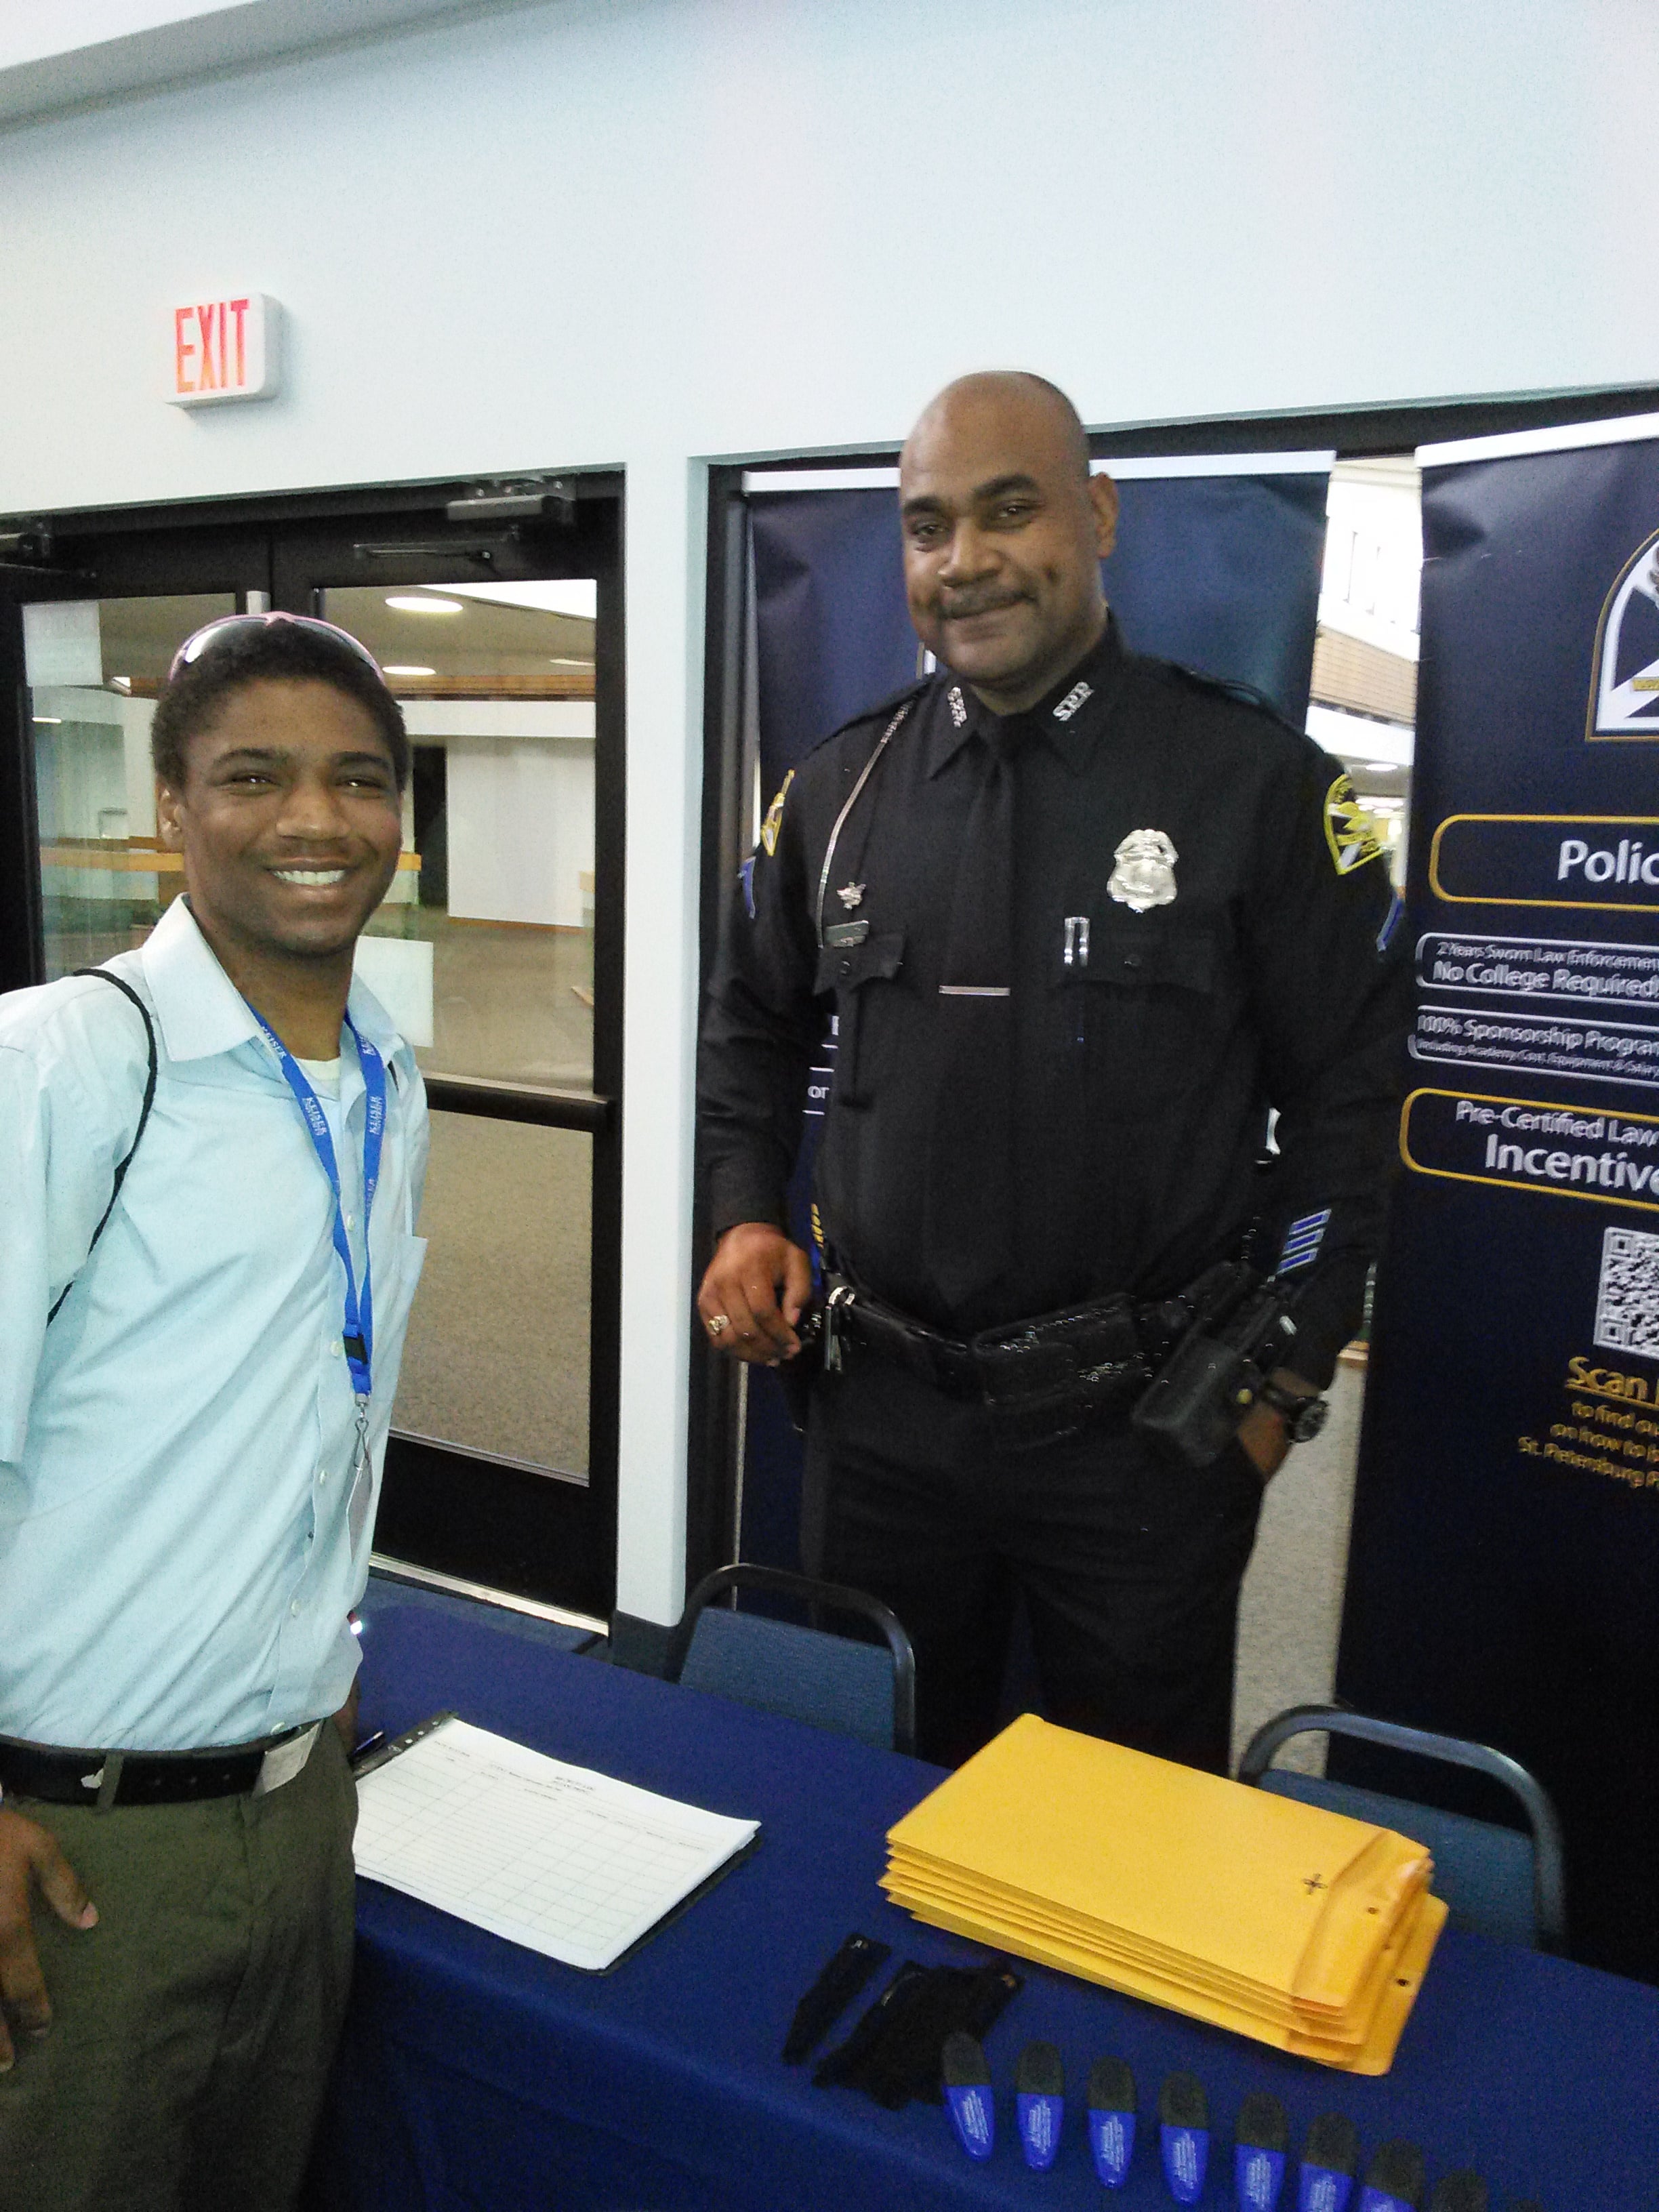 Career Fair Provides Clearwater Students with Job Search and Networking Opportunities